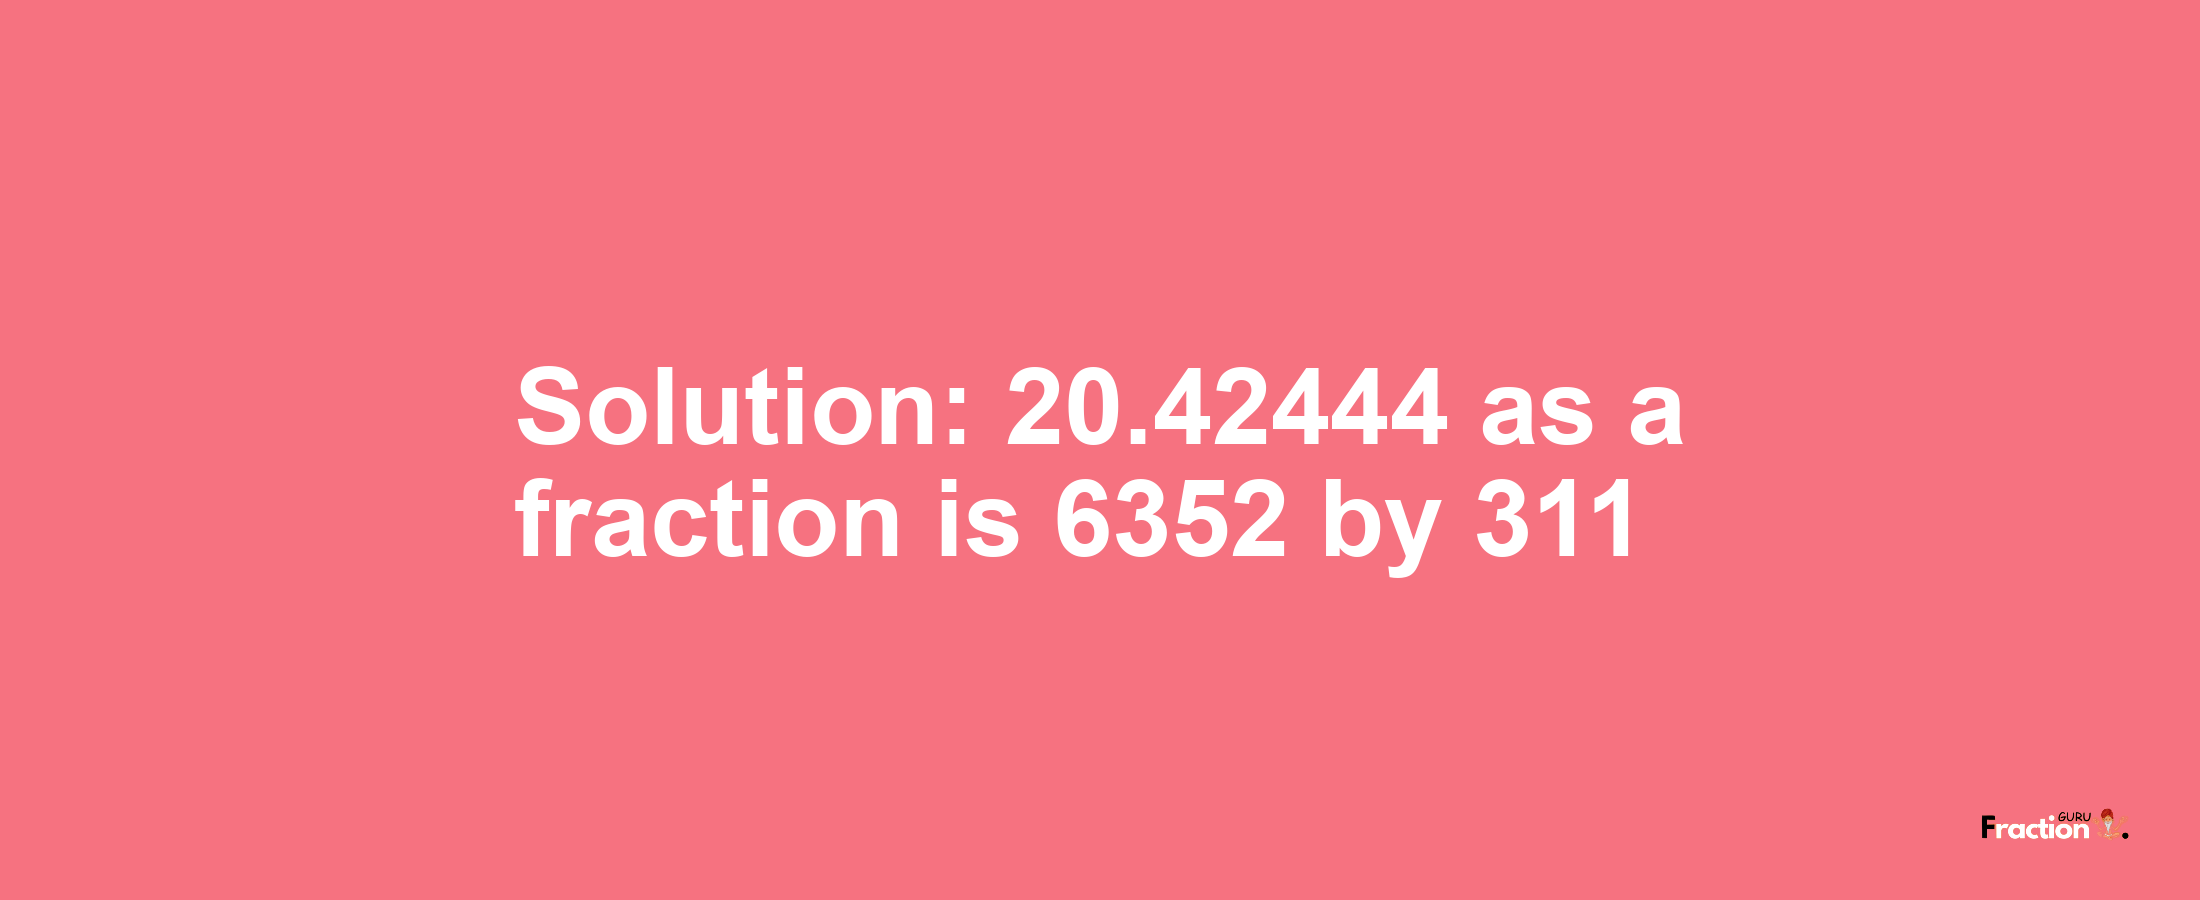 Solution:20.42444 as a fraction is 6352/311